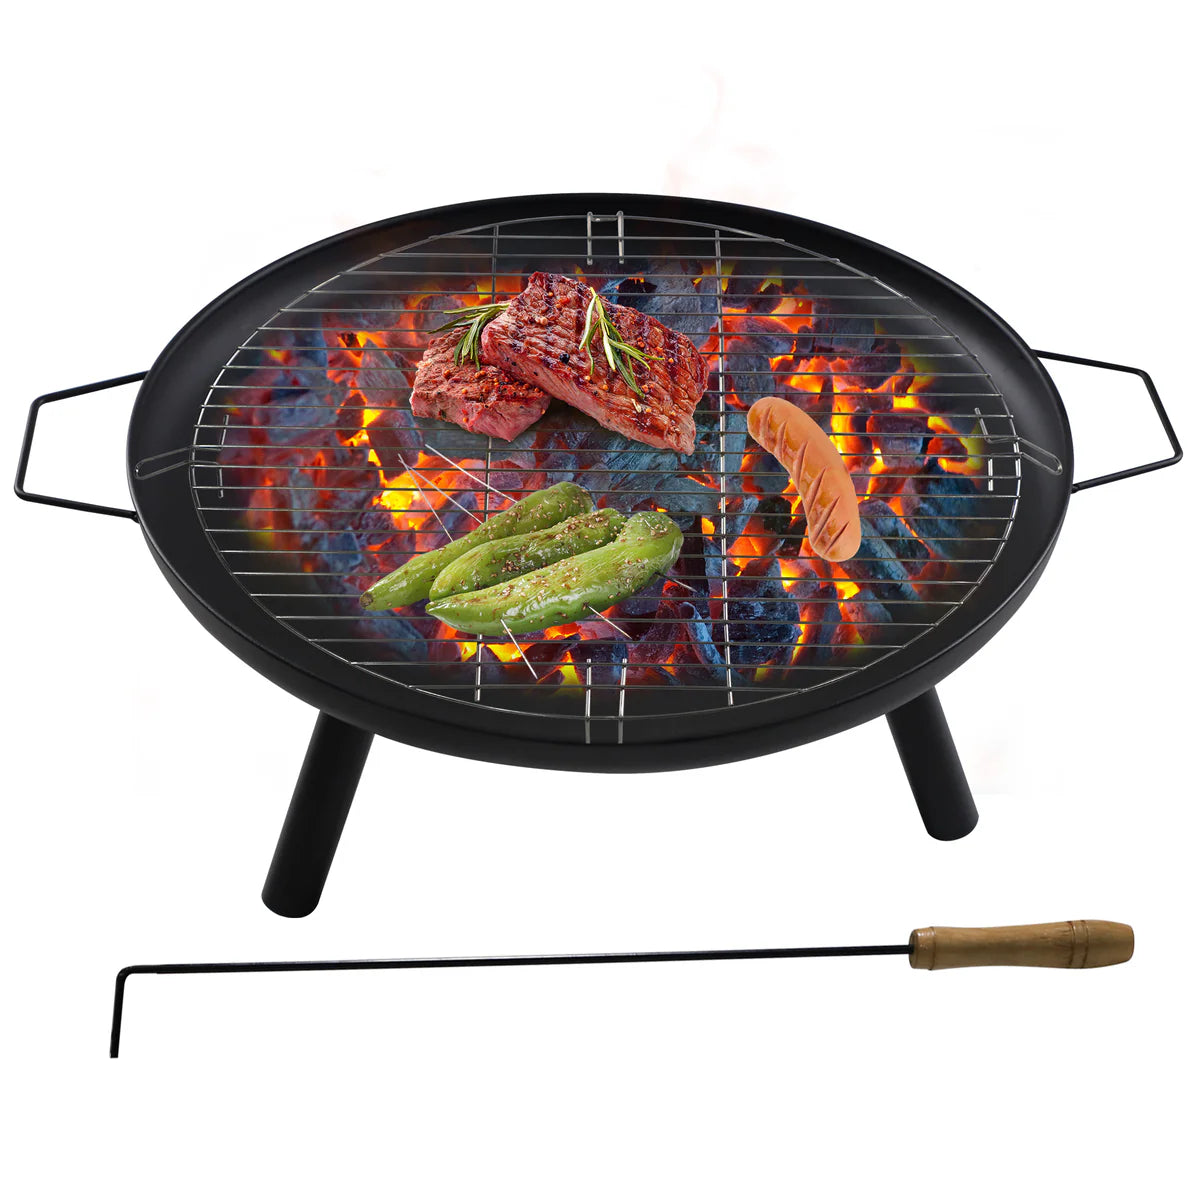 23" Outdoor Patio Round Wood Burning Fire Pit Bowl with Grill and Poker | karmasfar.us